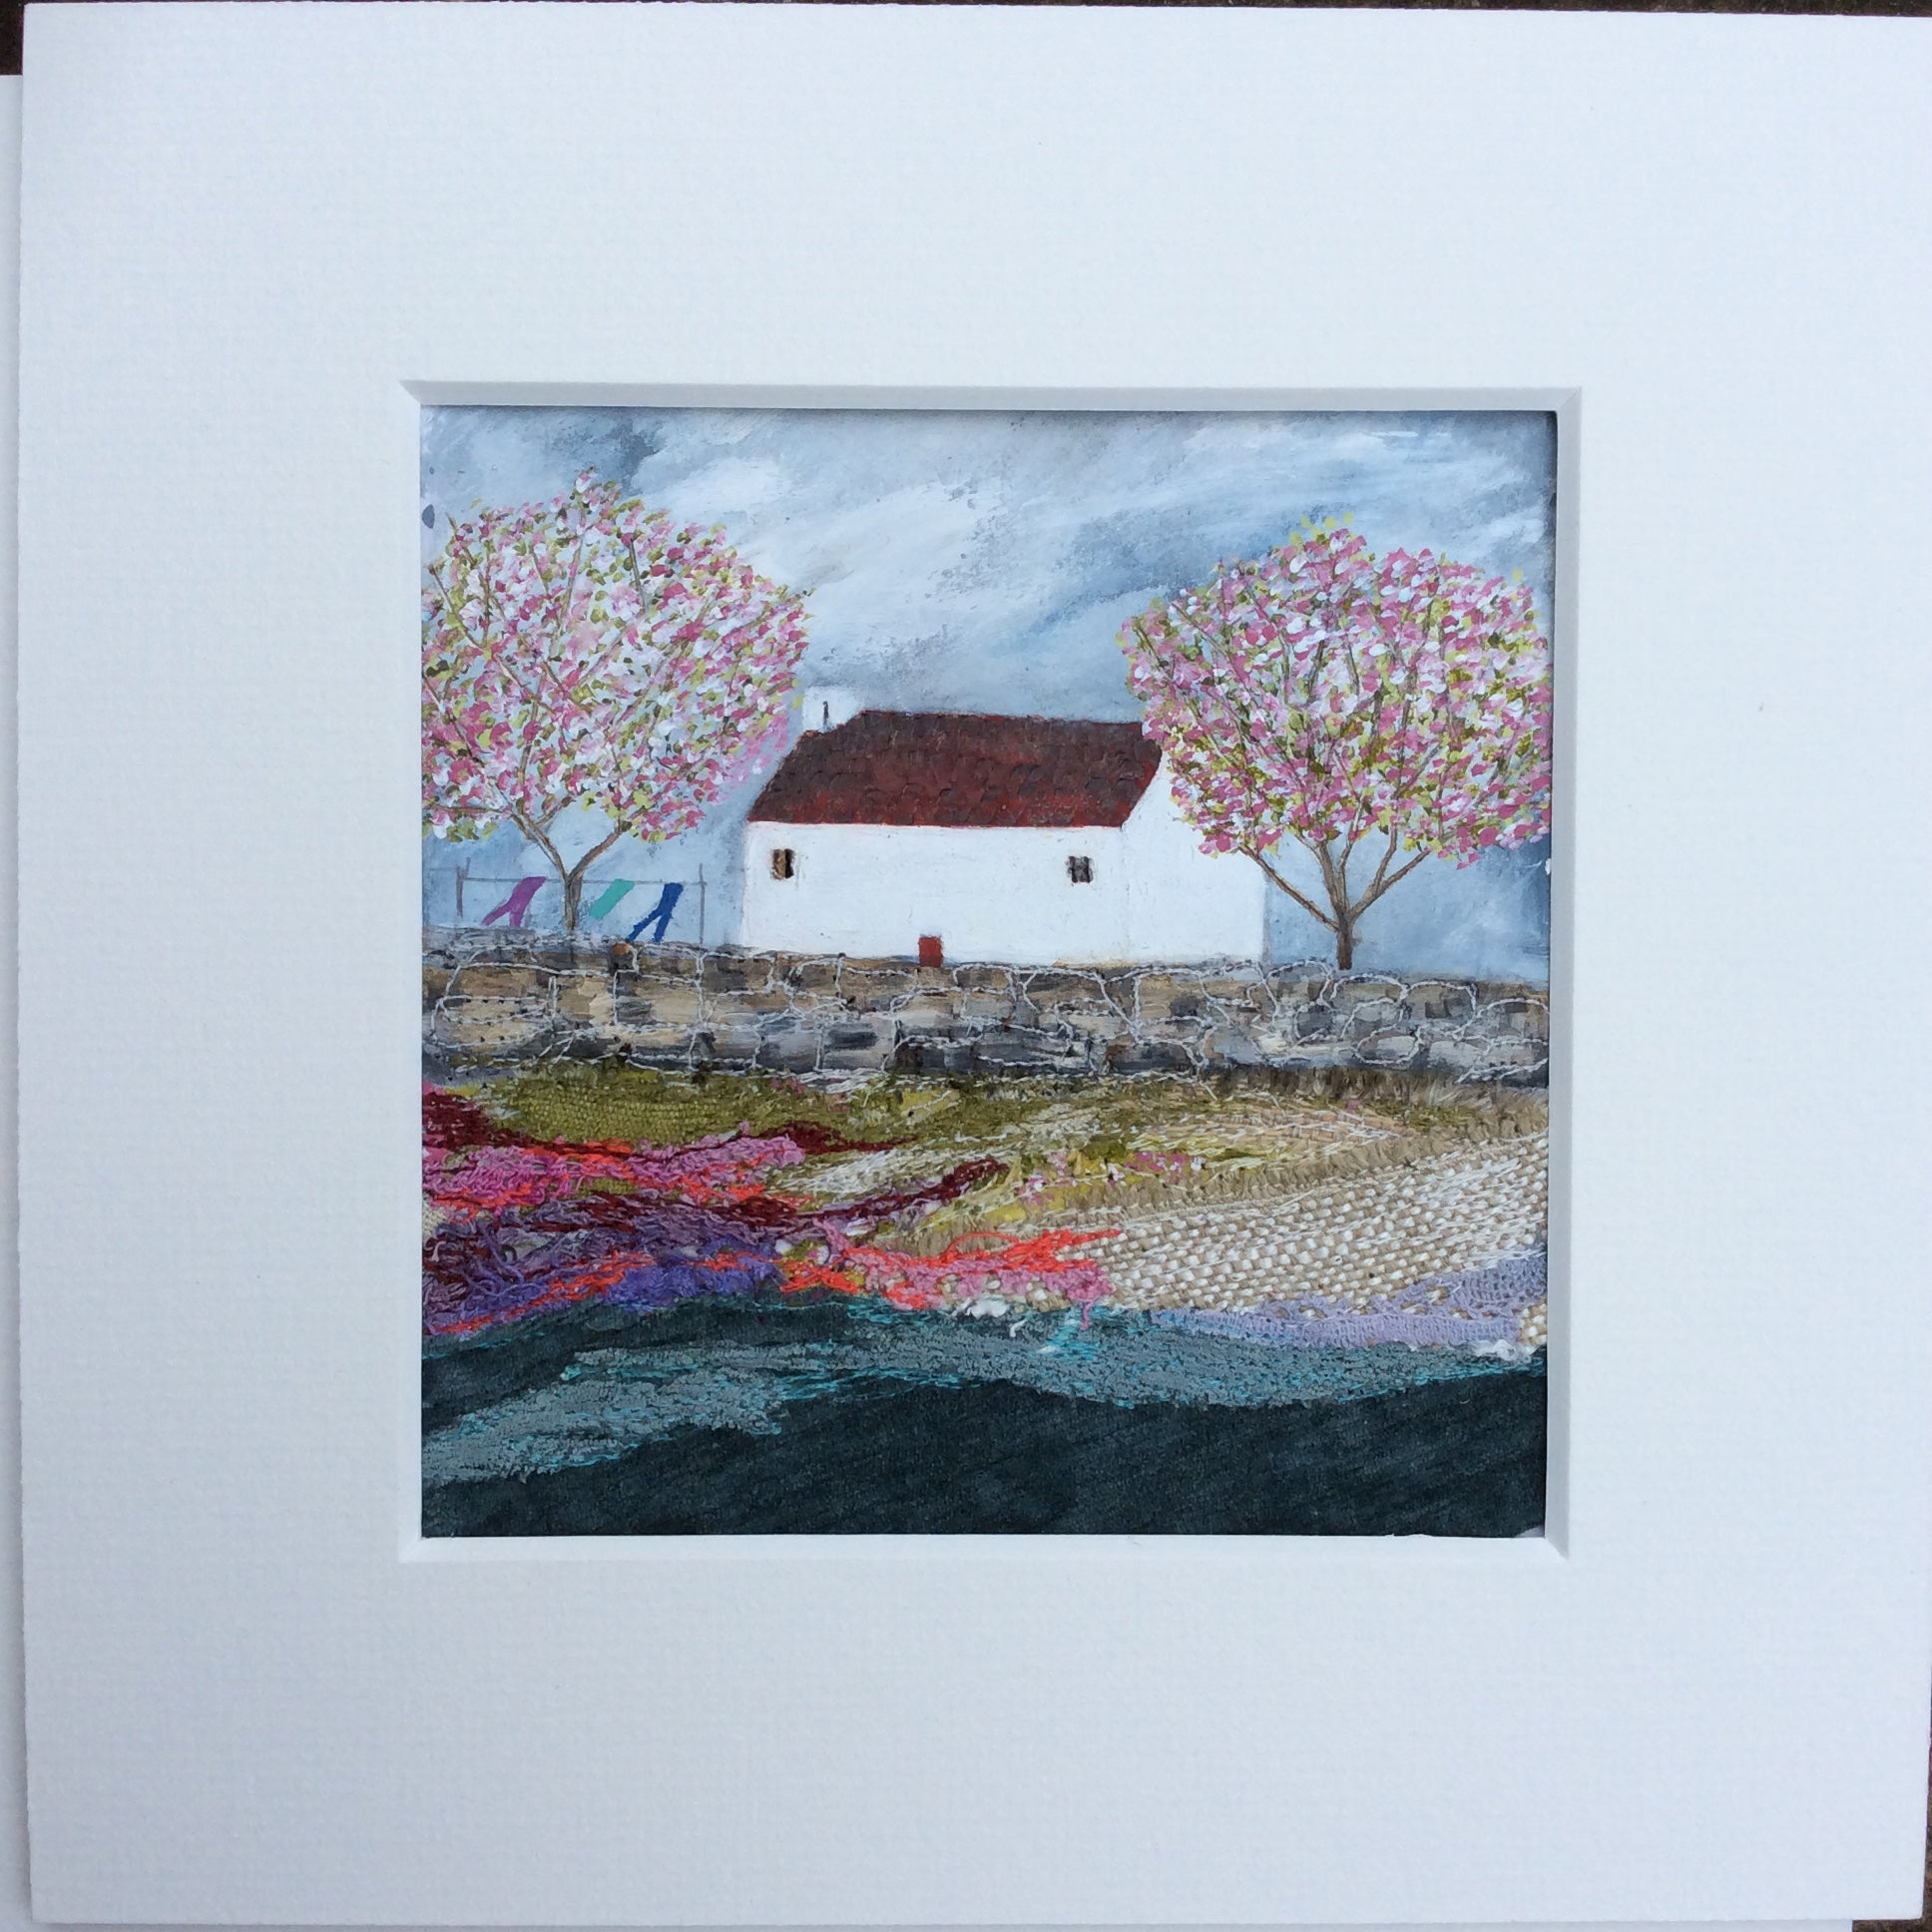 Mixed Media Art By Louise O'Hara “Forge Cottage”